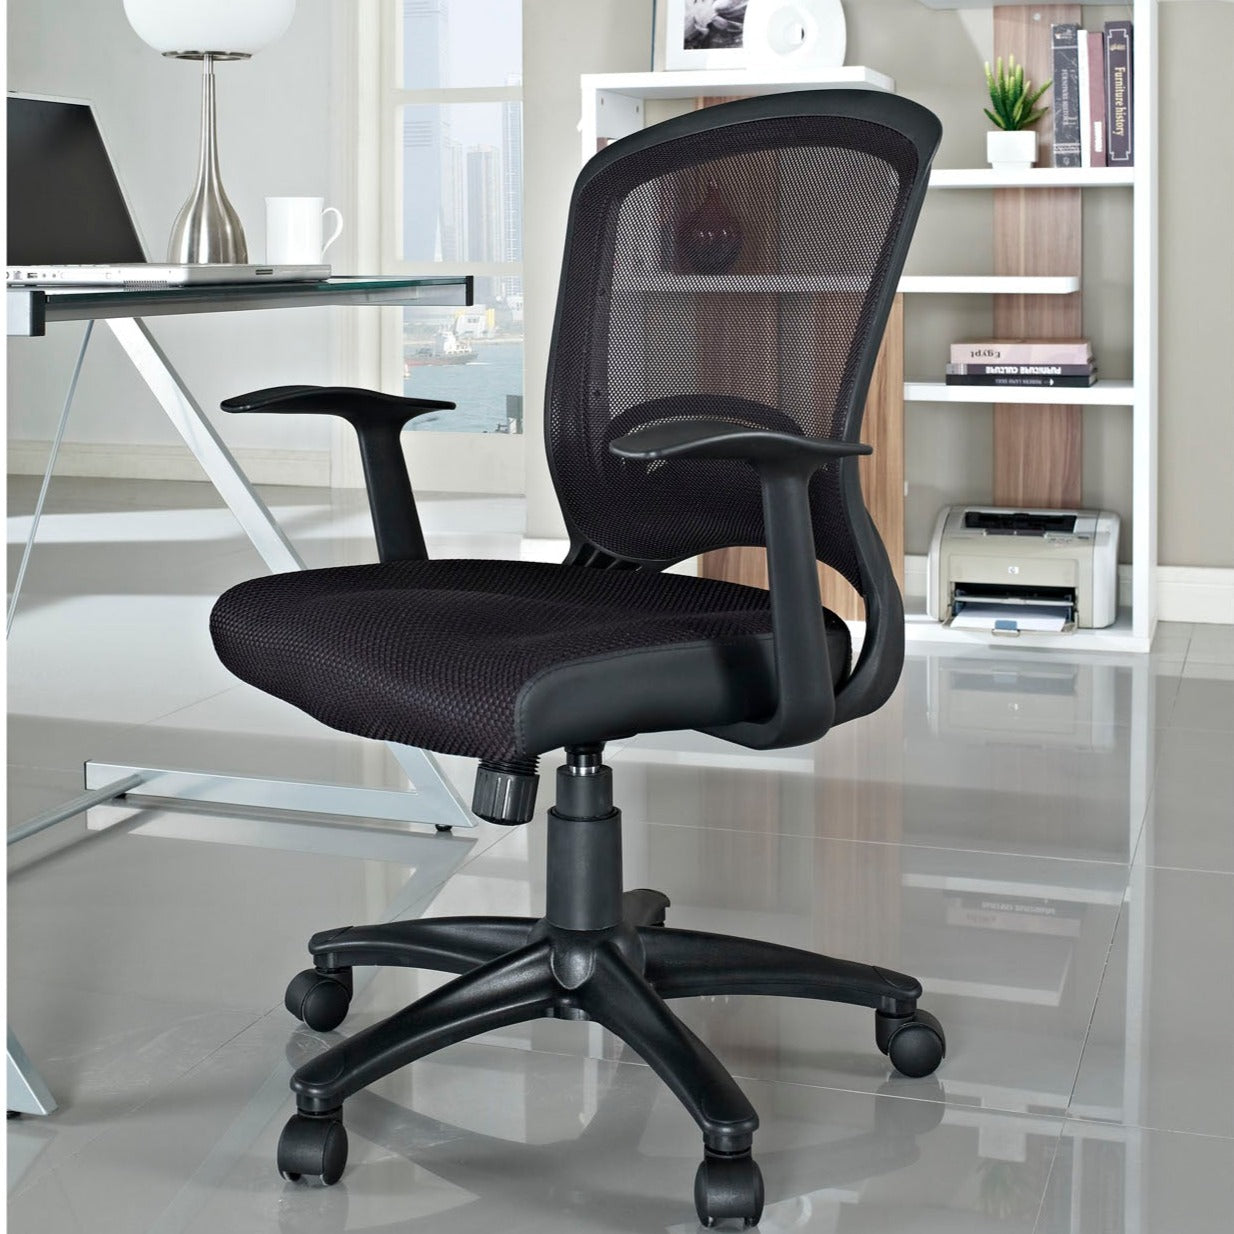 Buy Pulse Mesh Office Chair at Attractive Prices